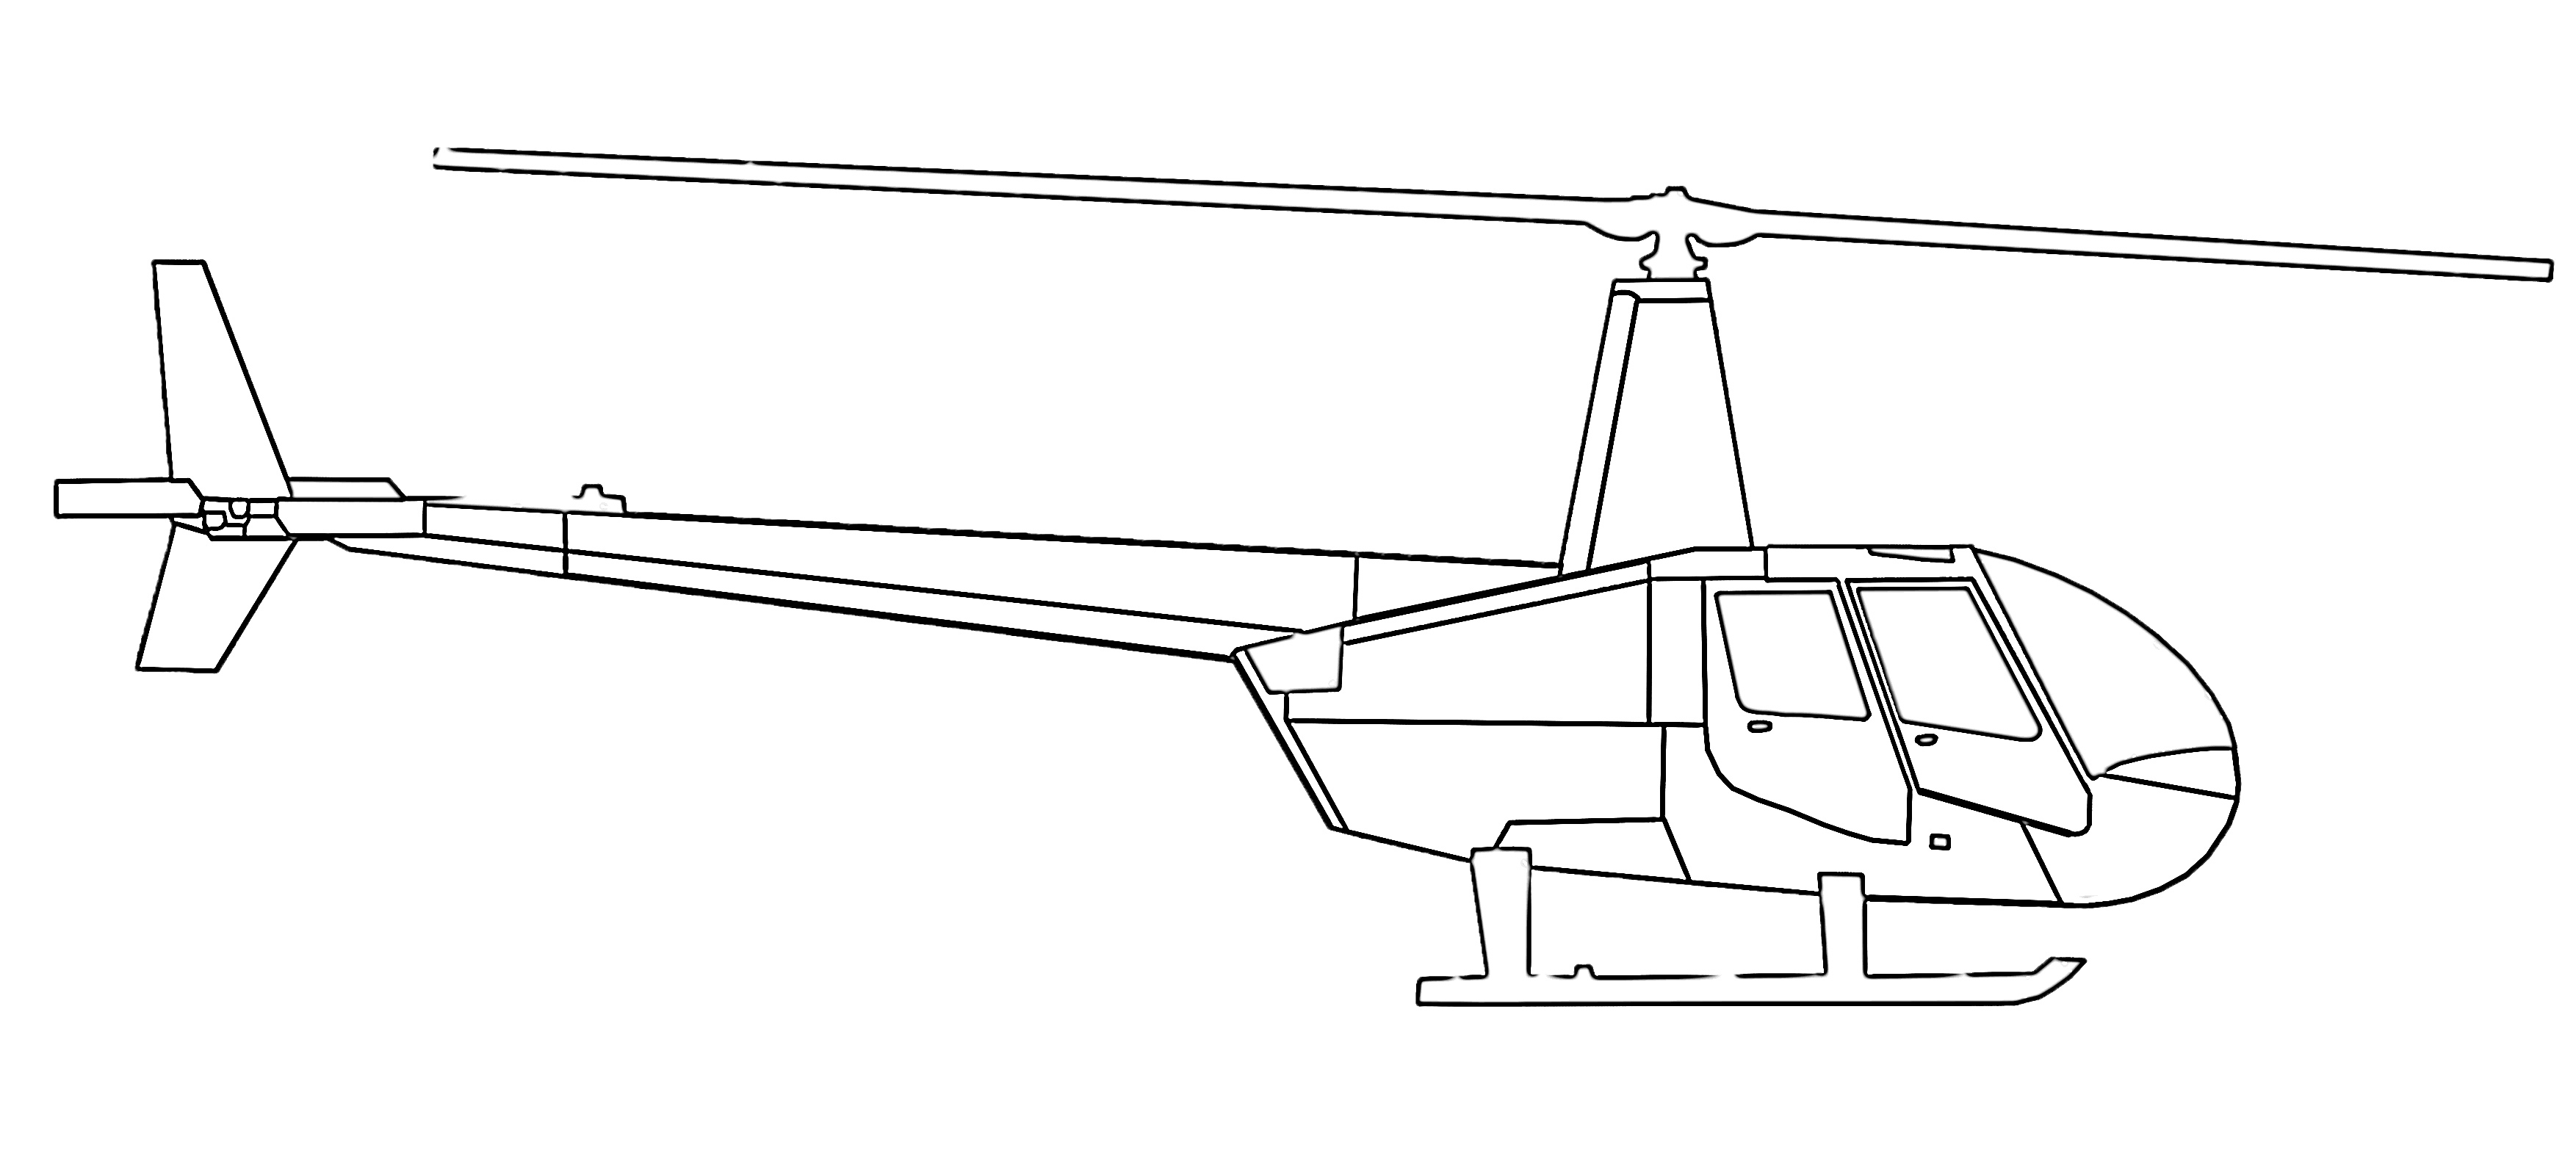 20 Free Helicopter Coloring Pages for Kids   Save, Print, & Enjoy